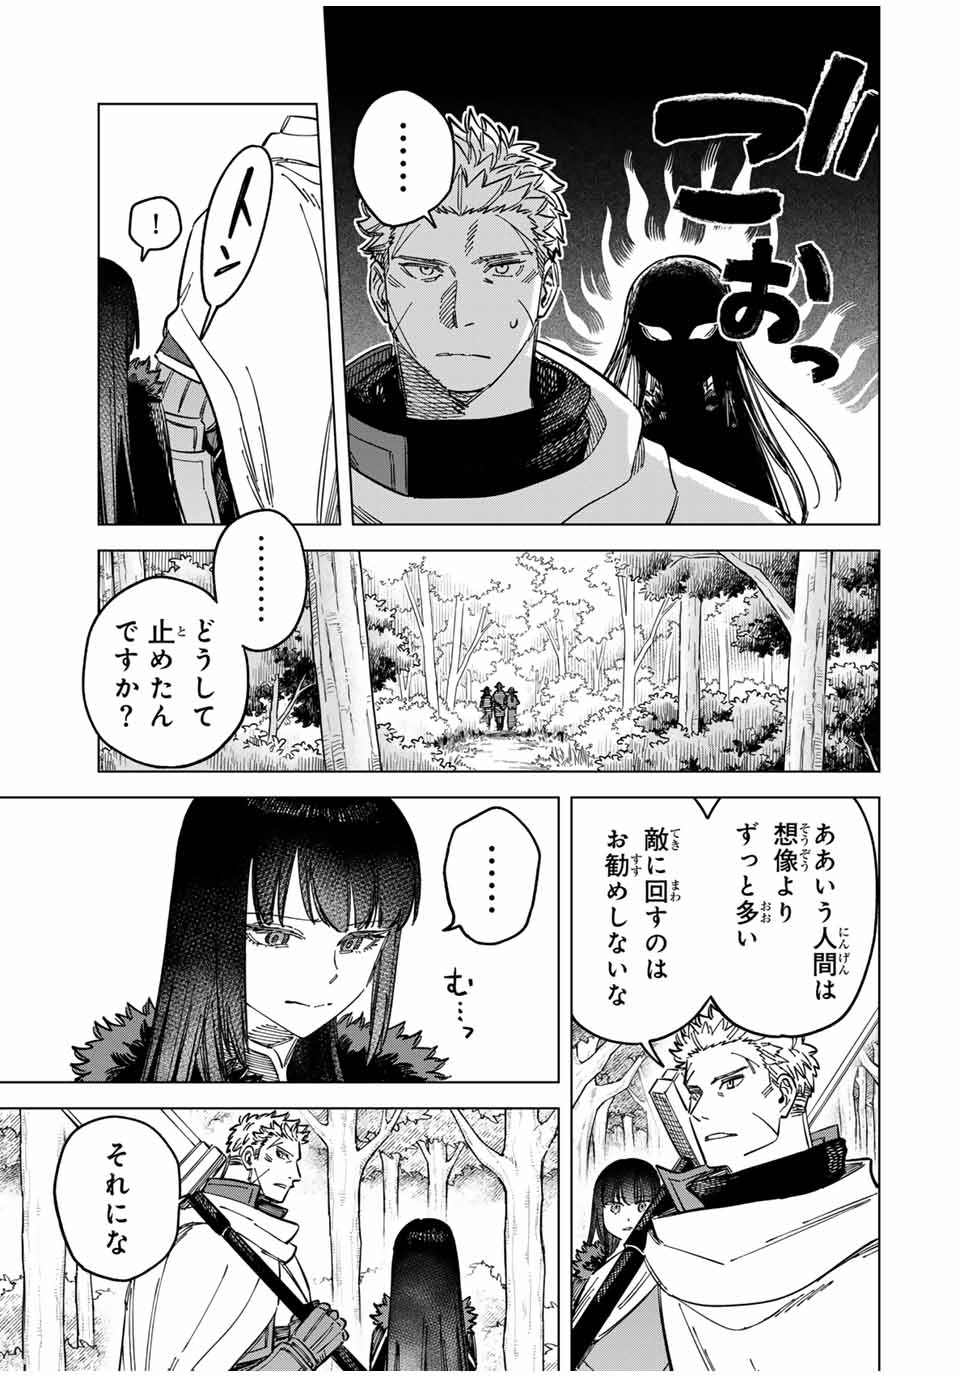 Witch and Mercenary 魔女と傭兵 第9.1話 - Page 7